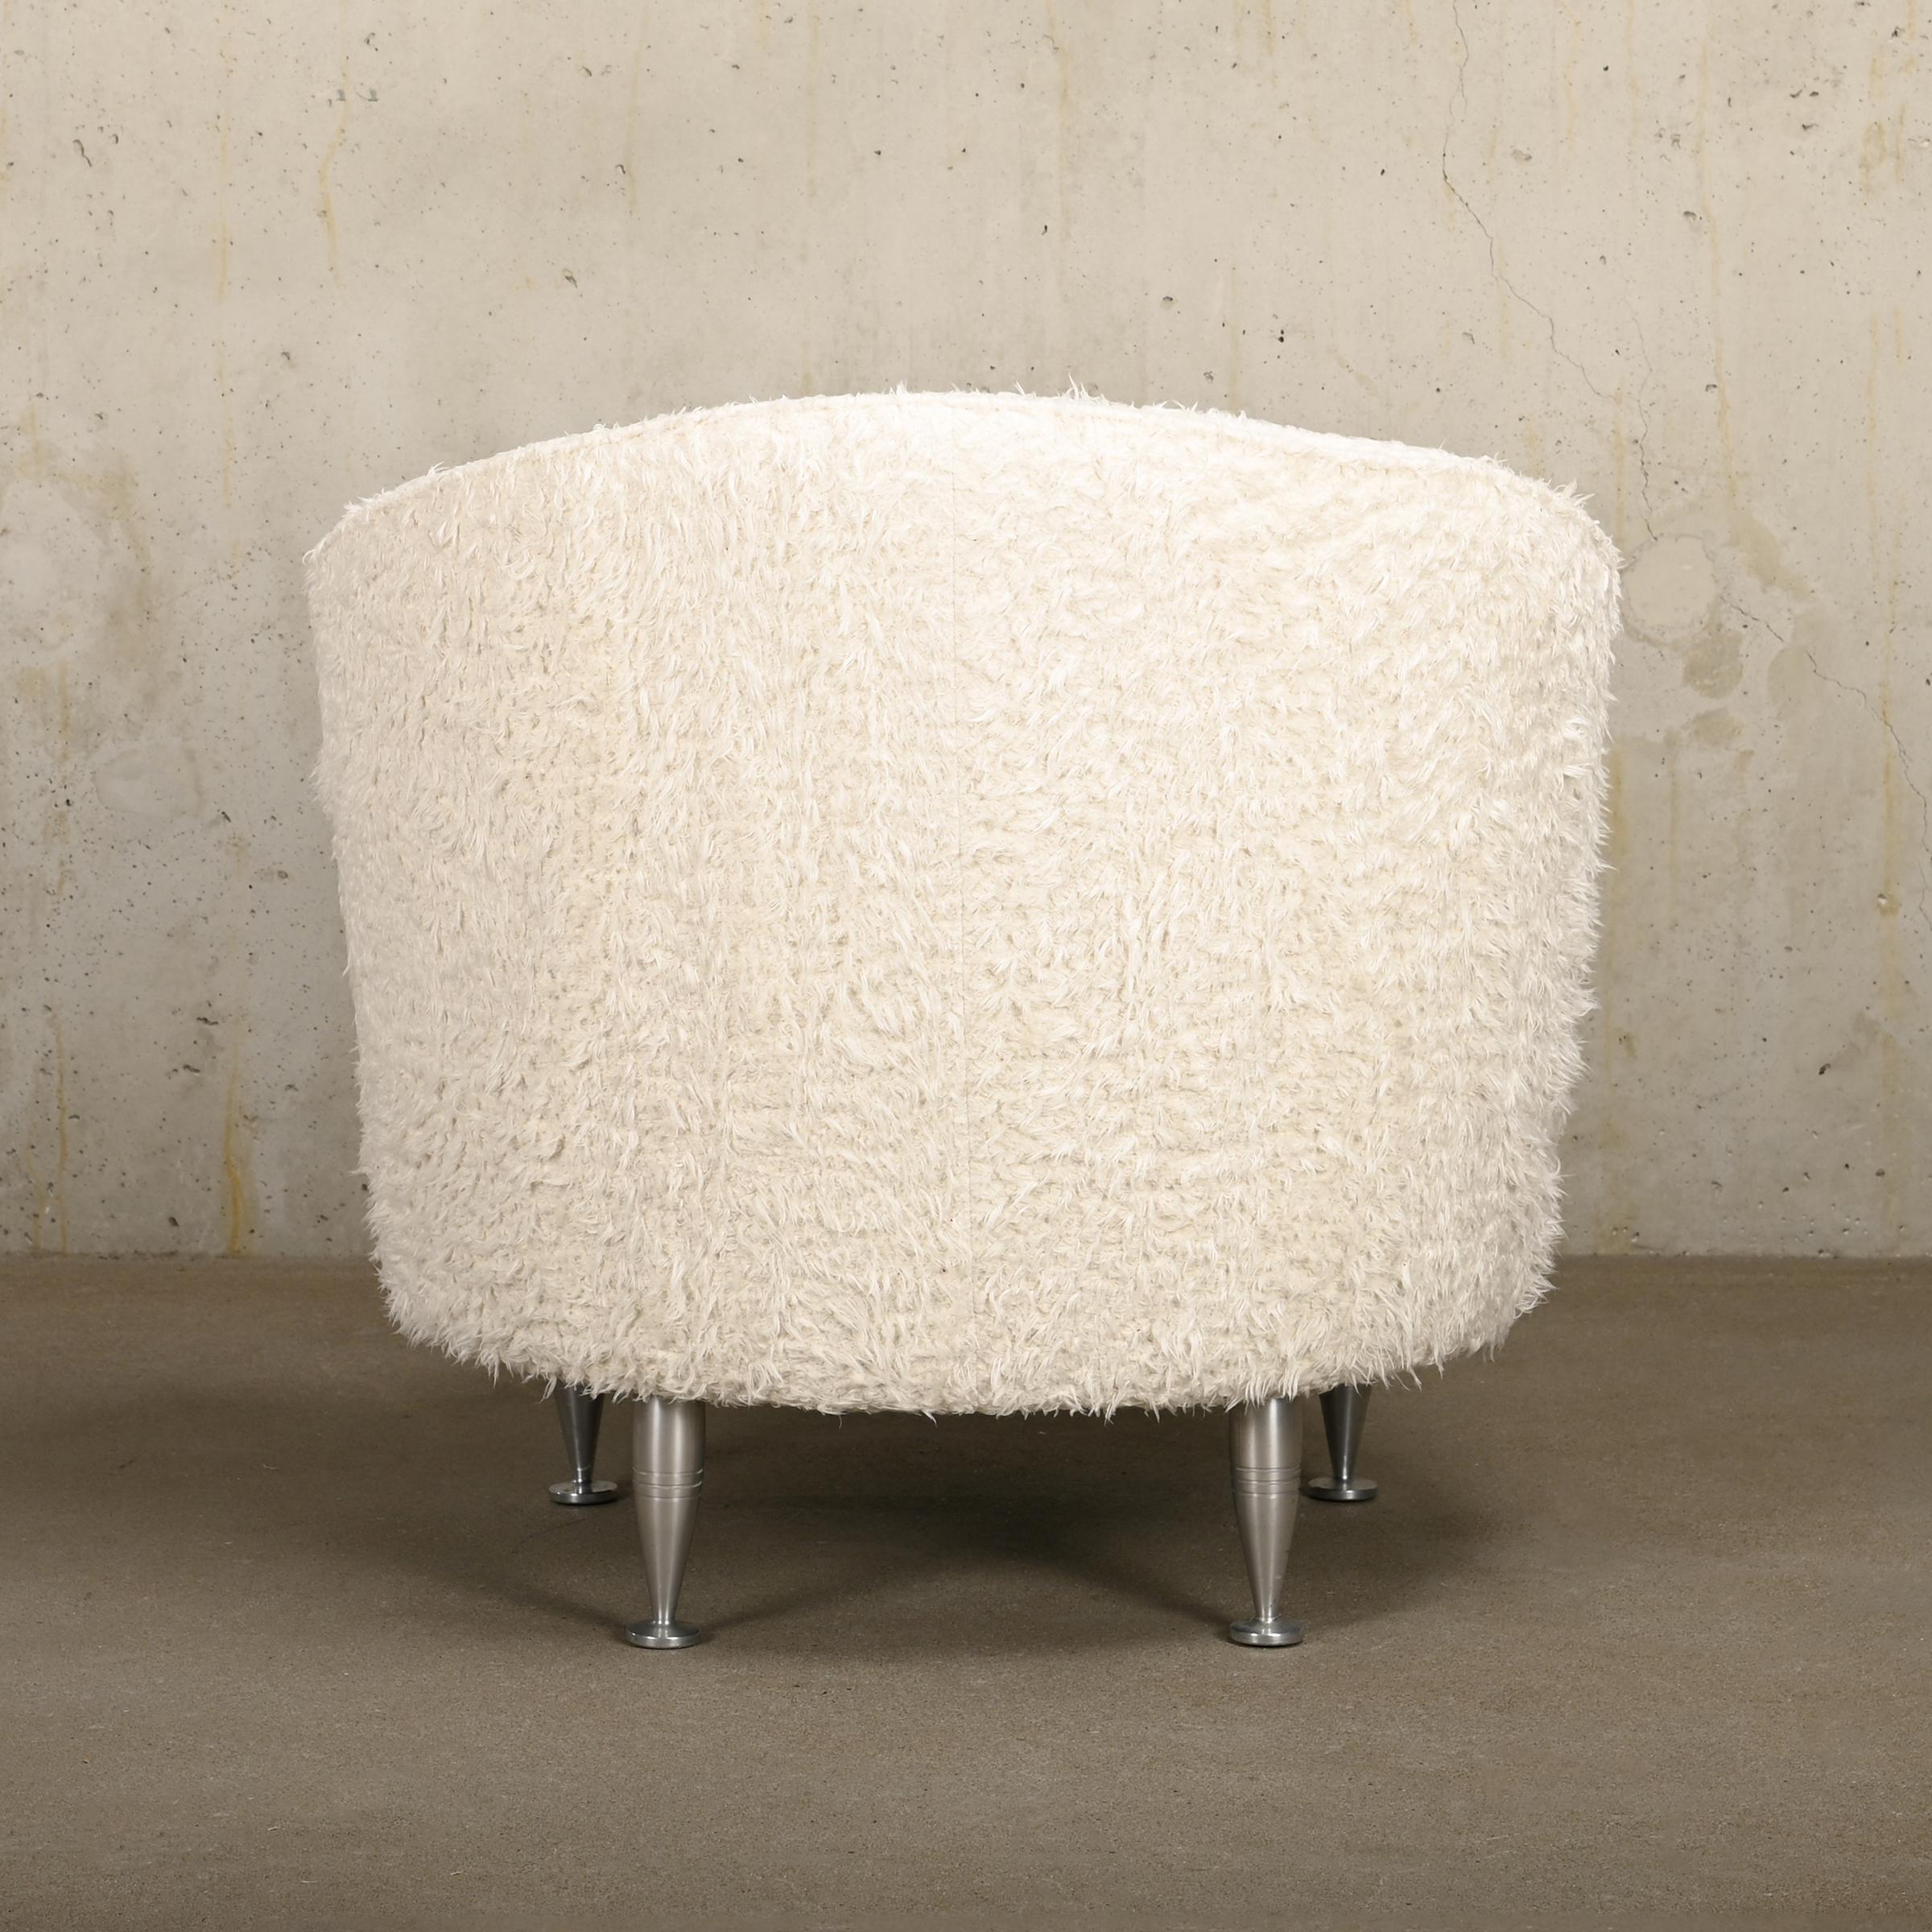 Modern Massimo Iosa Ghini Armchair New Tone in white long pile cotton for Moroso, Italy For Sale